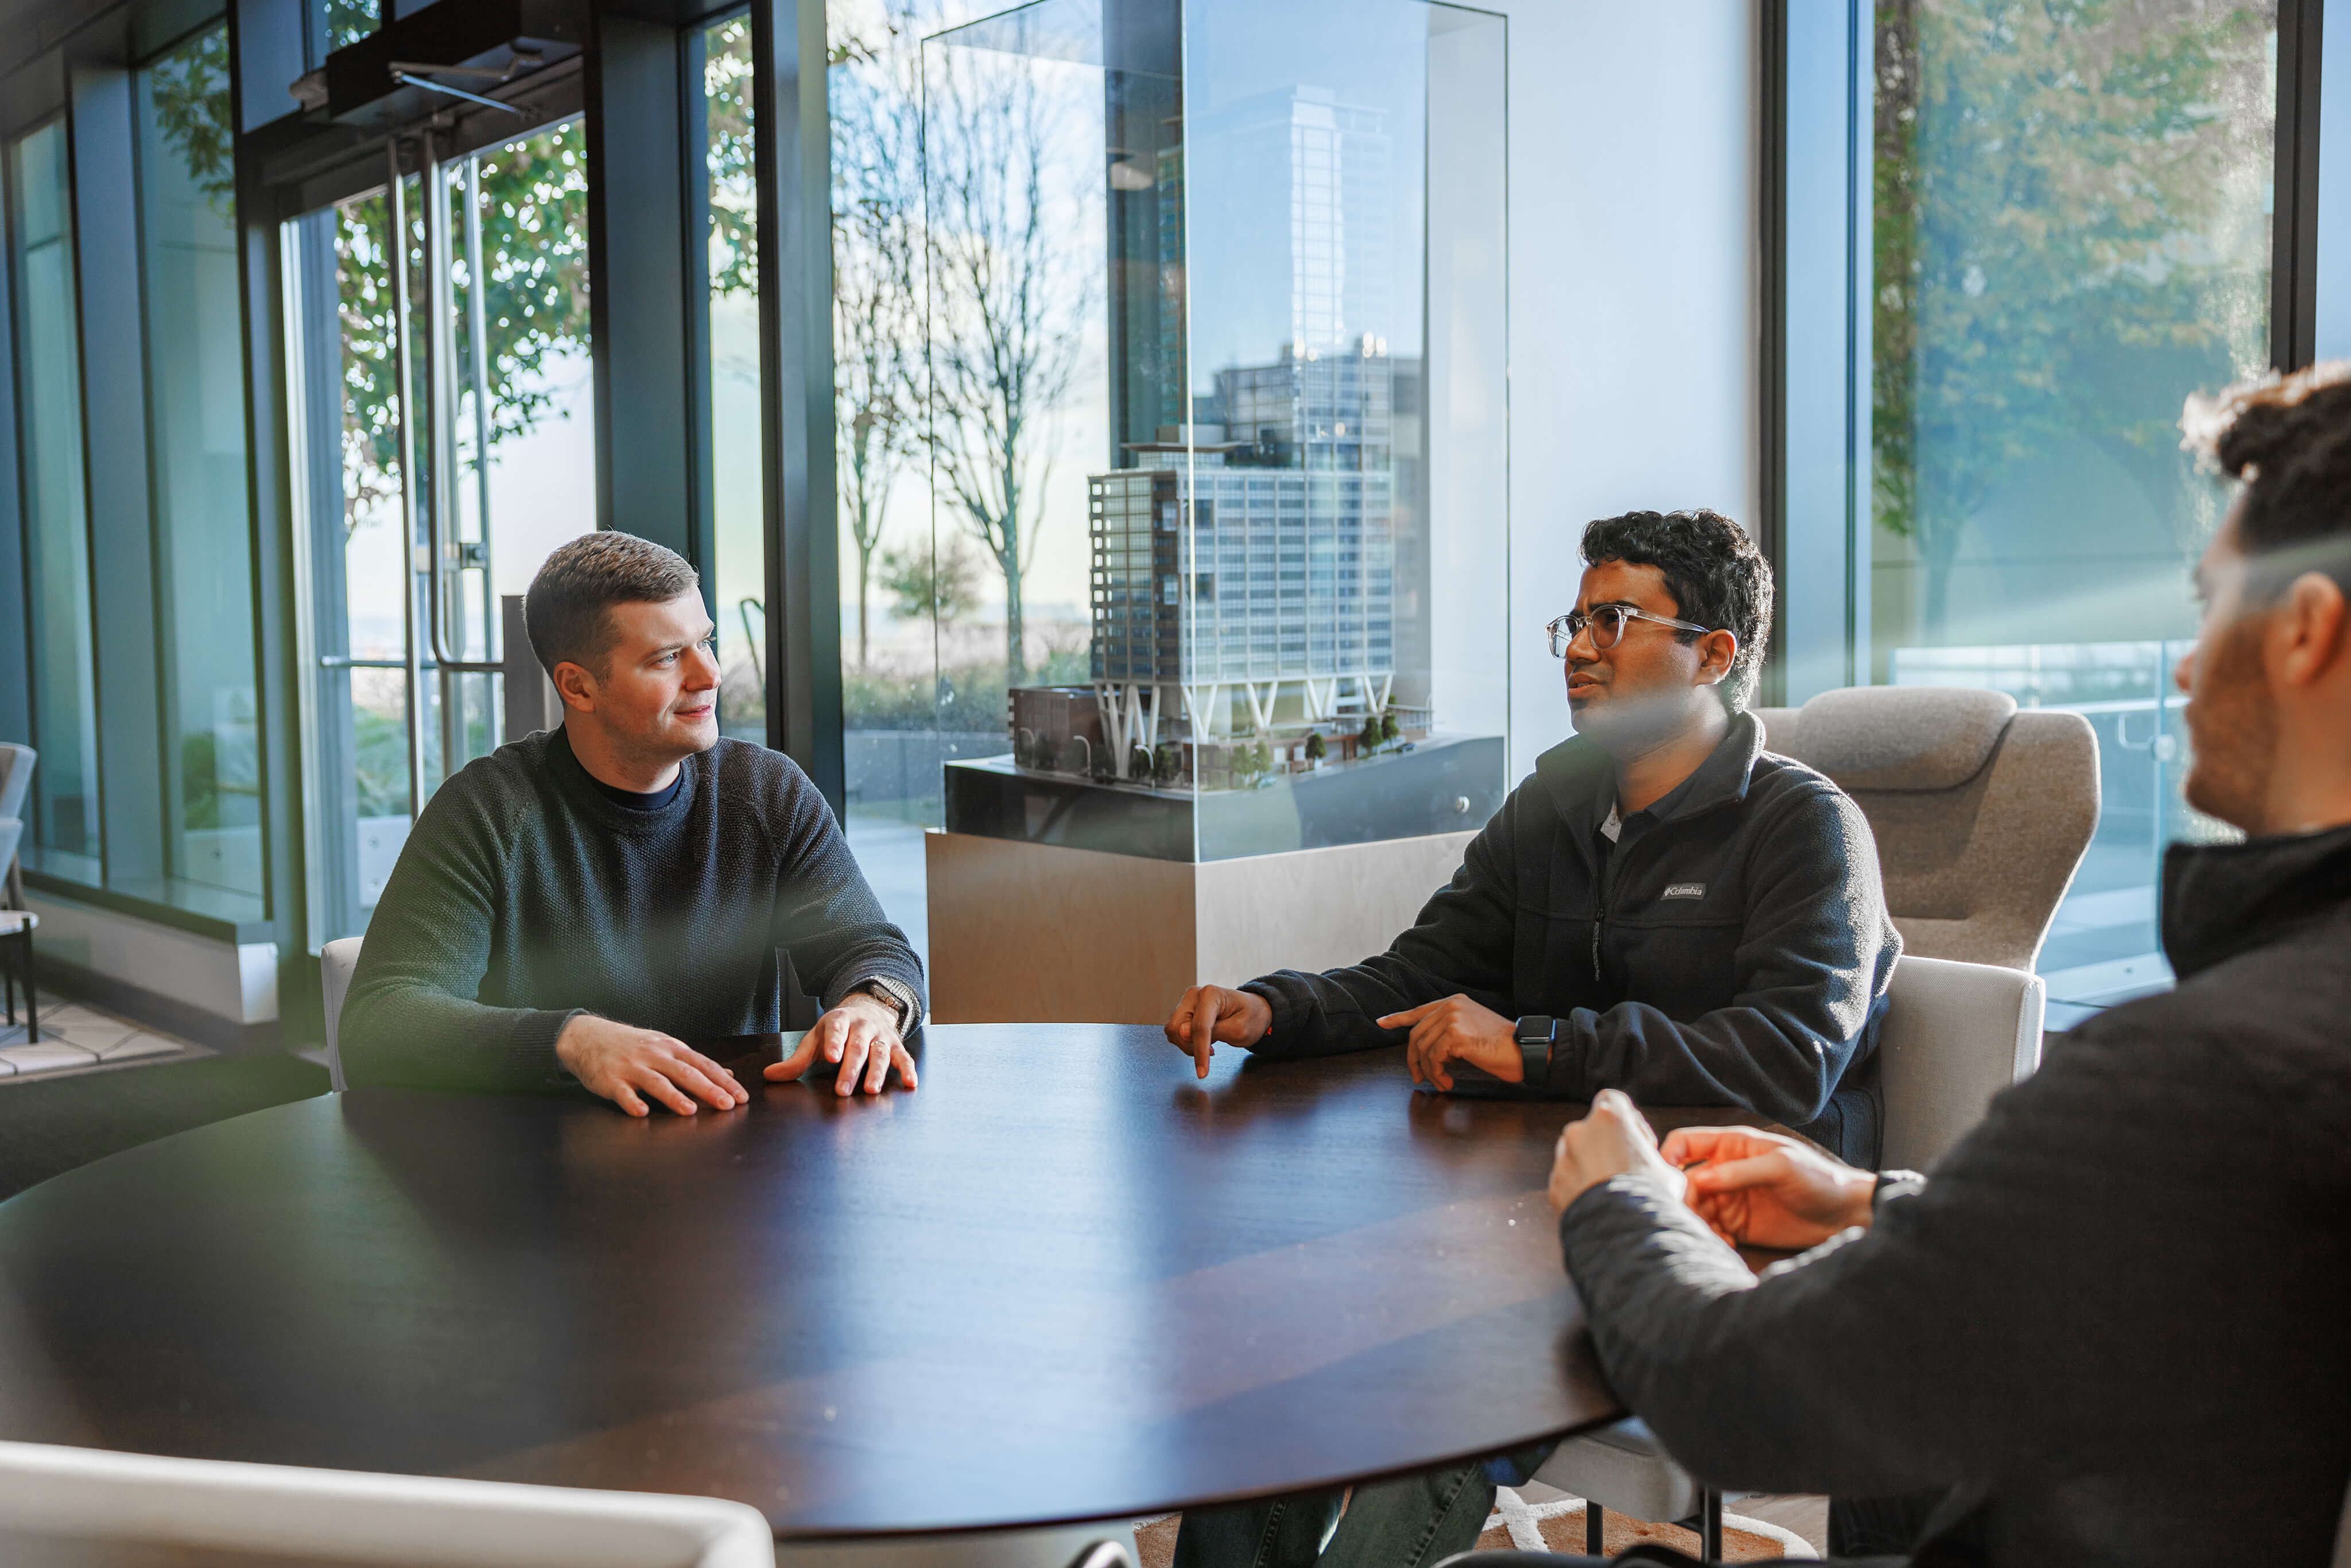 Three Protect AI employees sitting at a conference table having a discussion